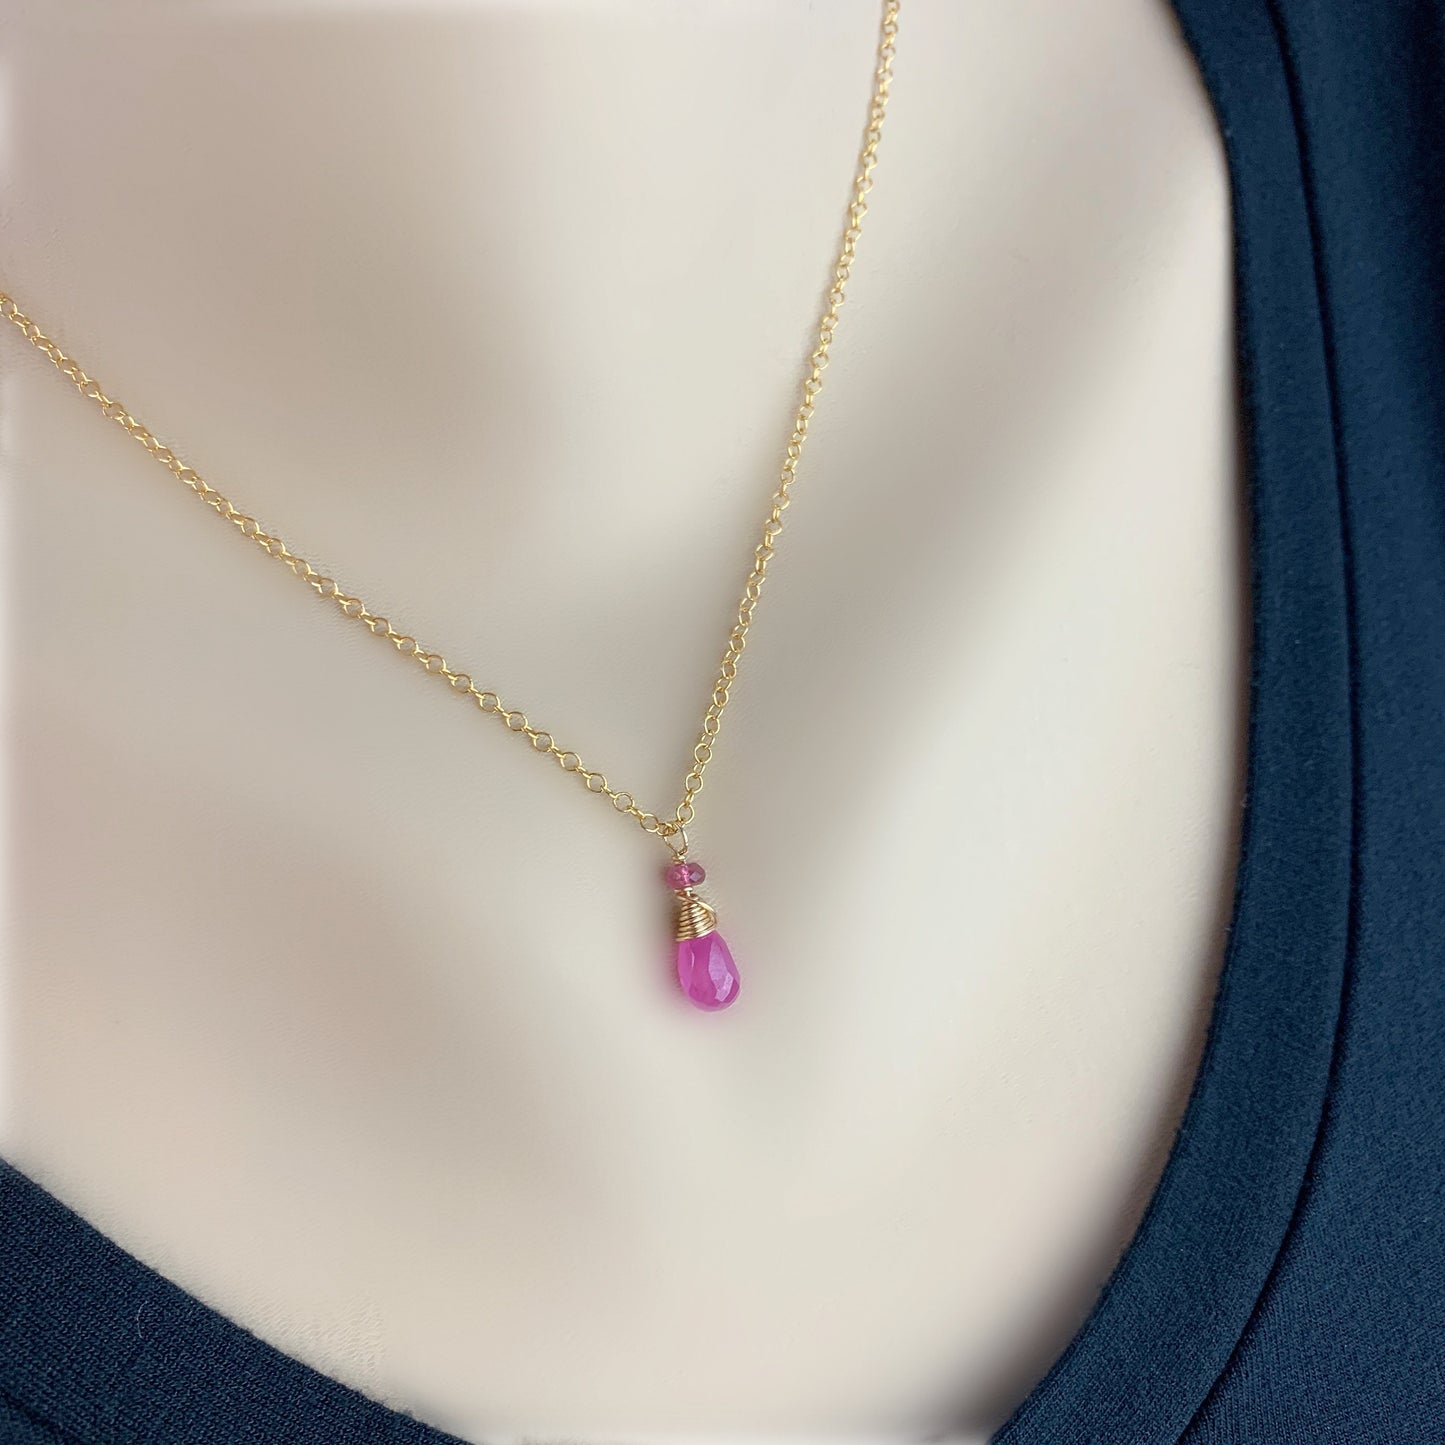 Sapphire Necklace Pink Sapphire September Birthstone Gold Necklace Silver Necklace Necklace for Women Layering Necklace Gift for Her